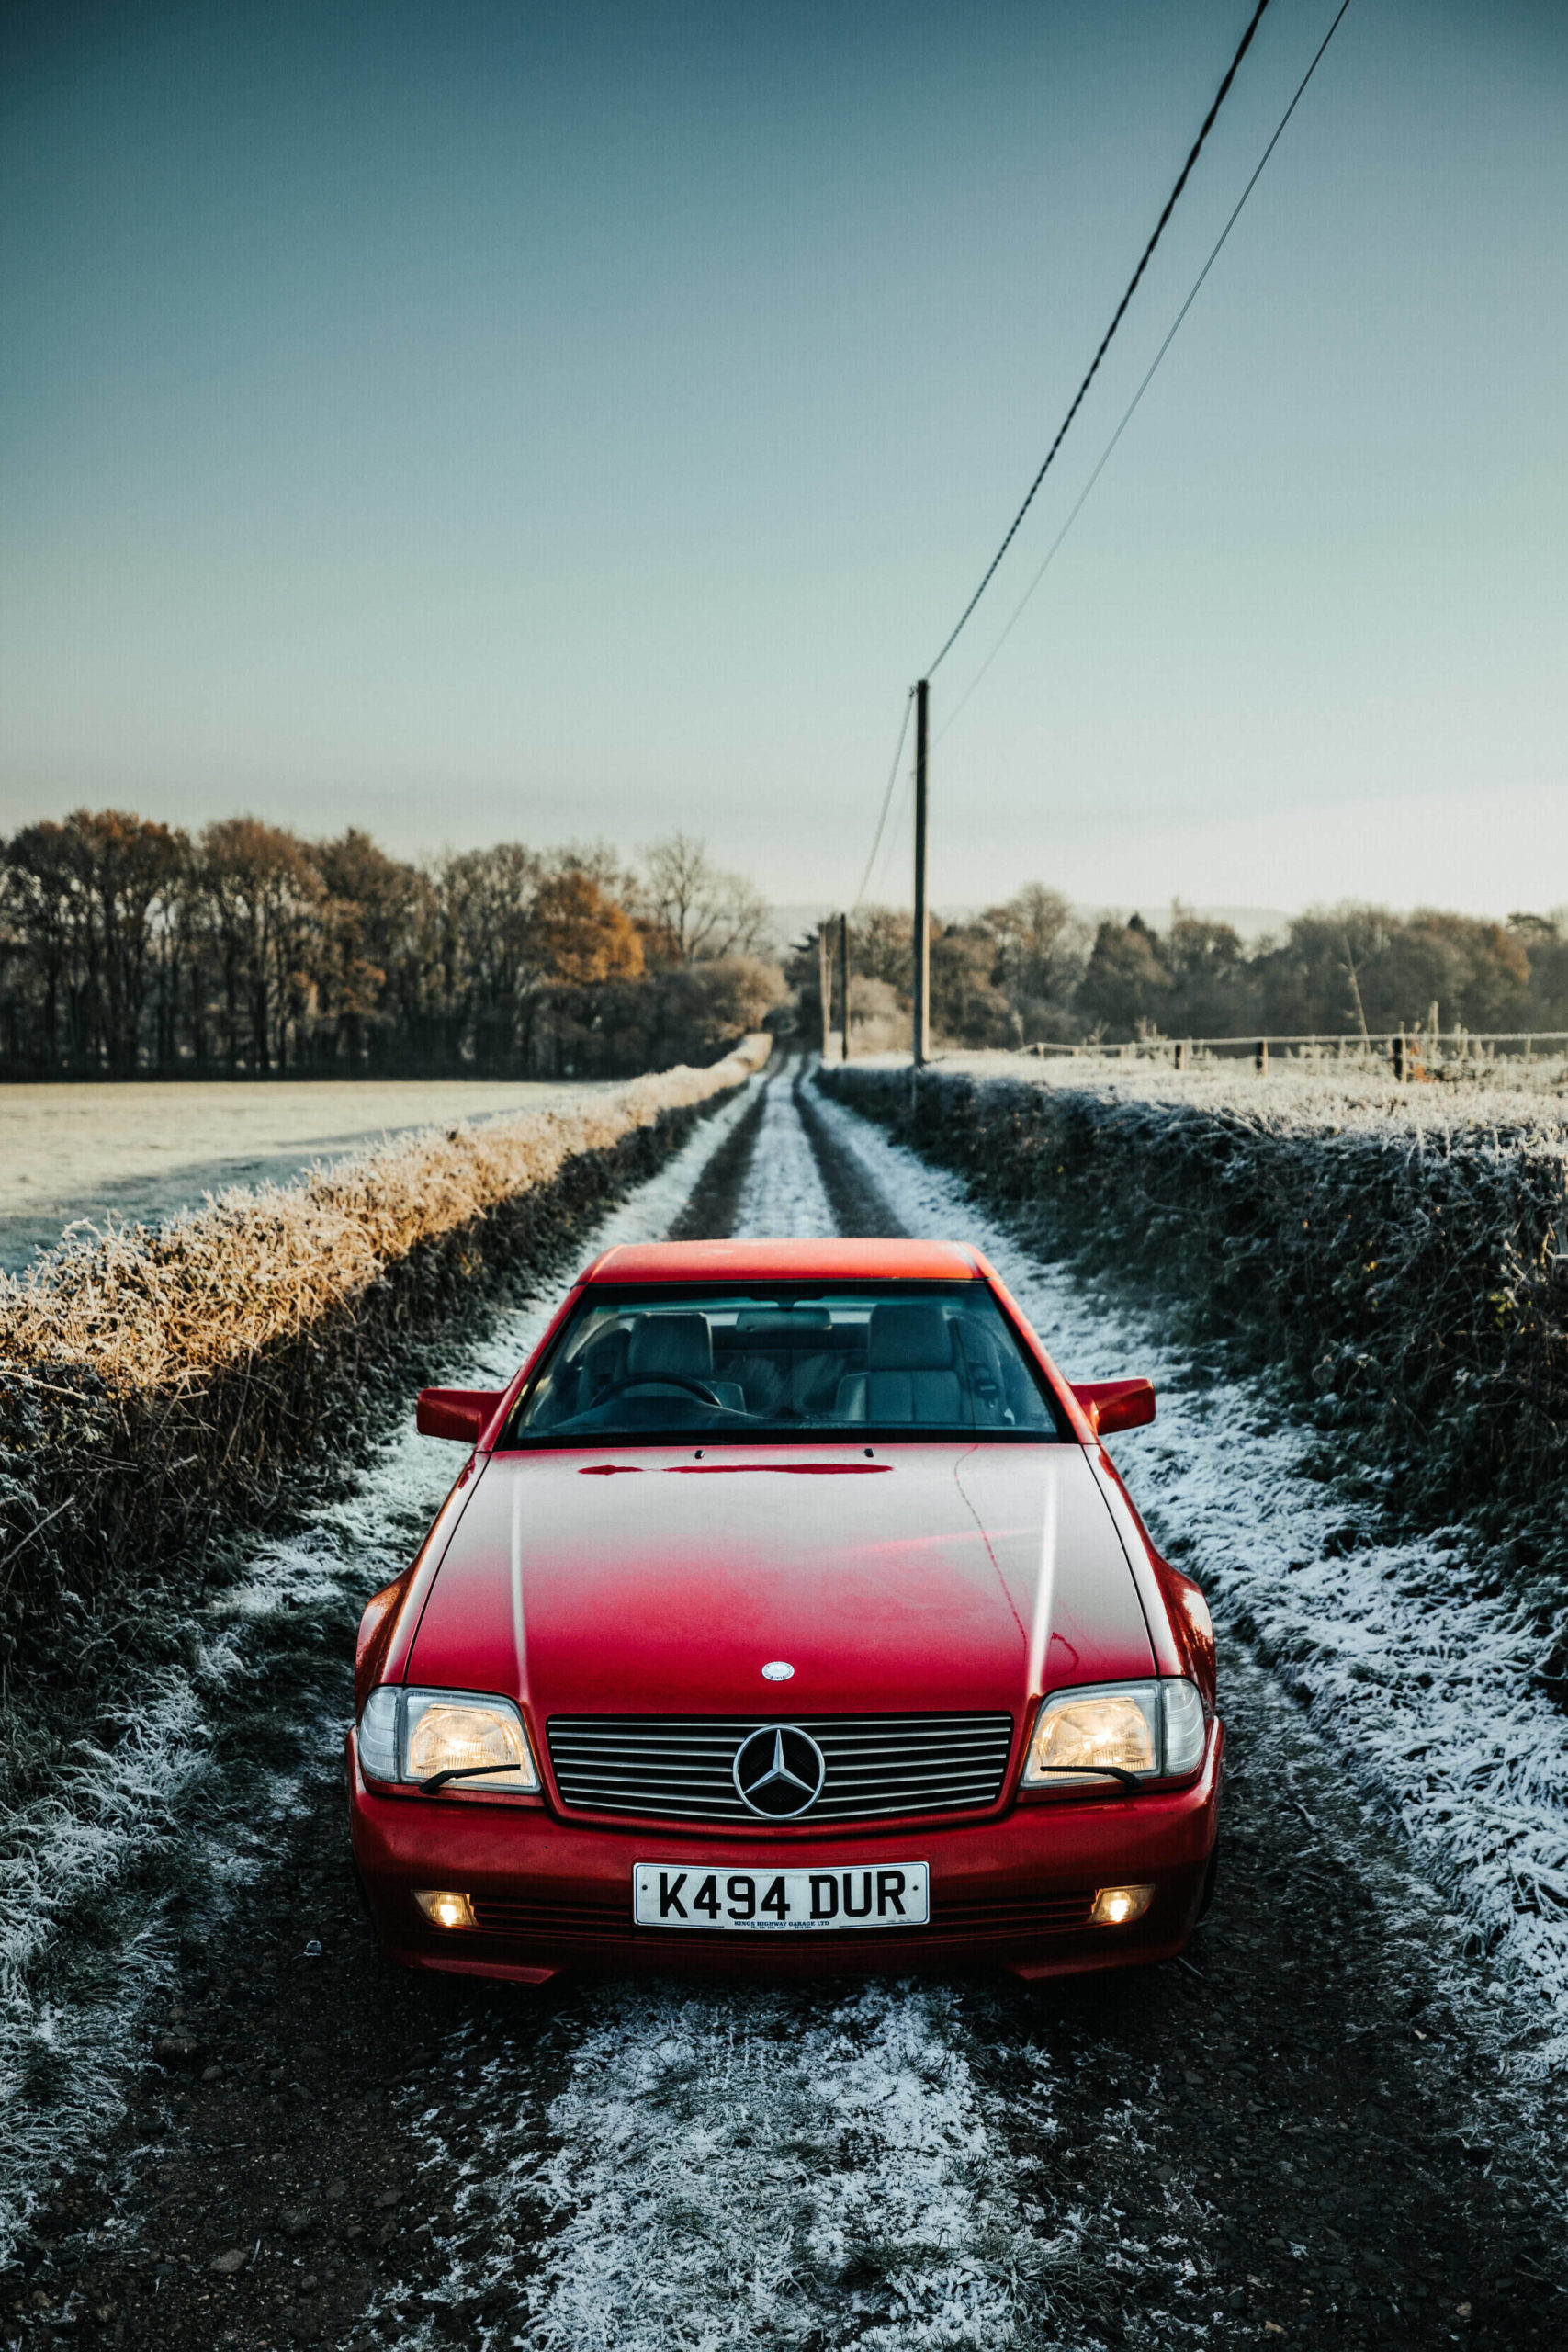 300SL on a frosty country lane.